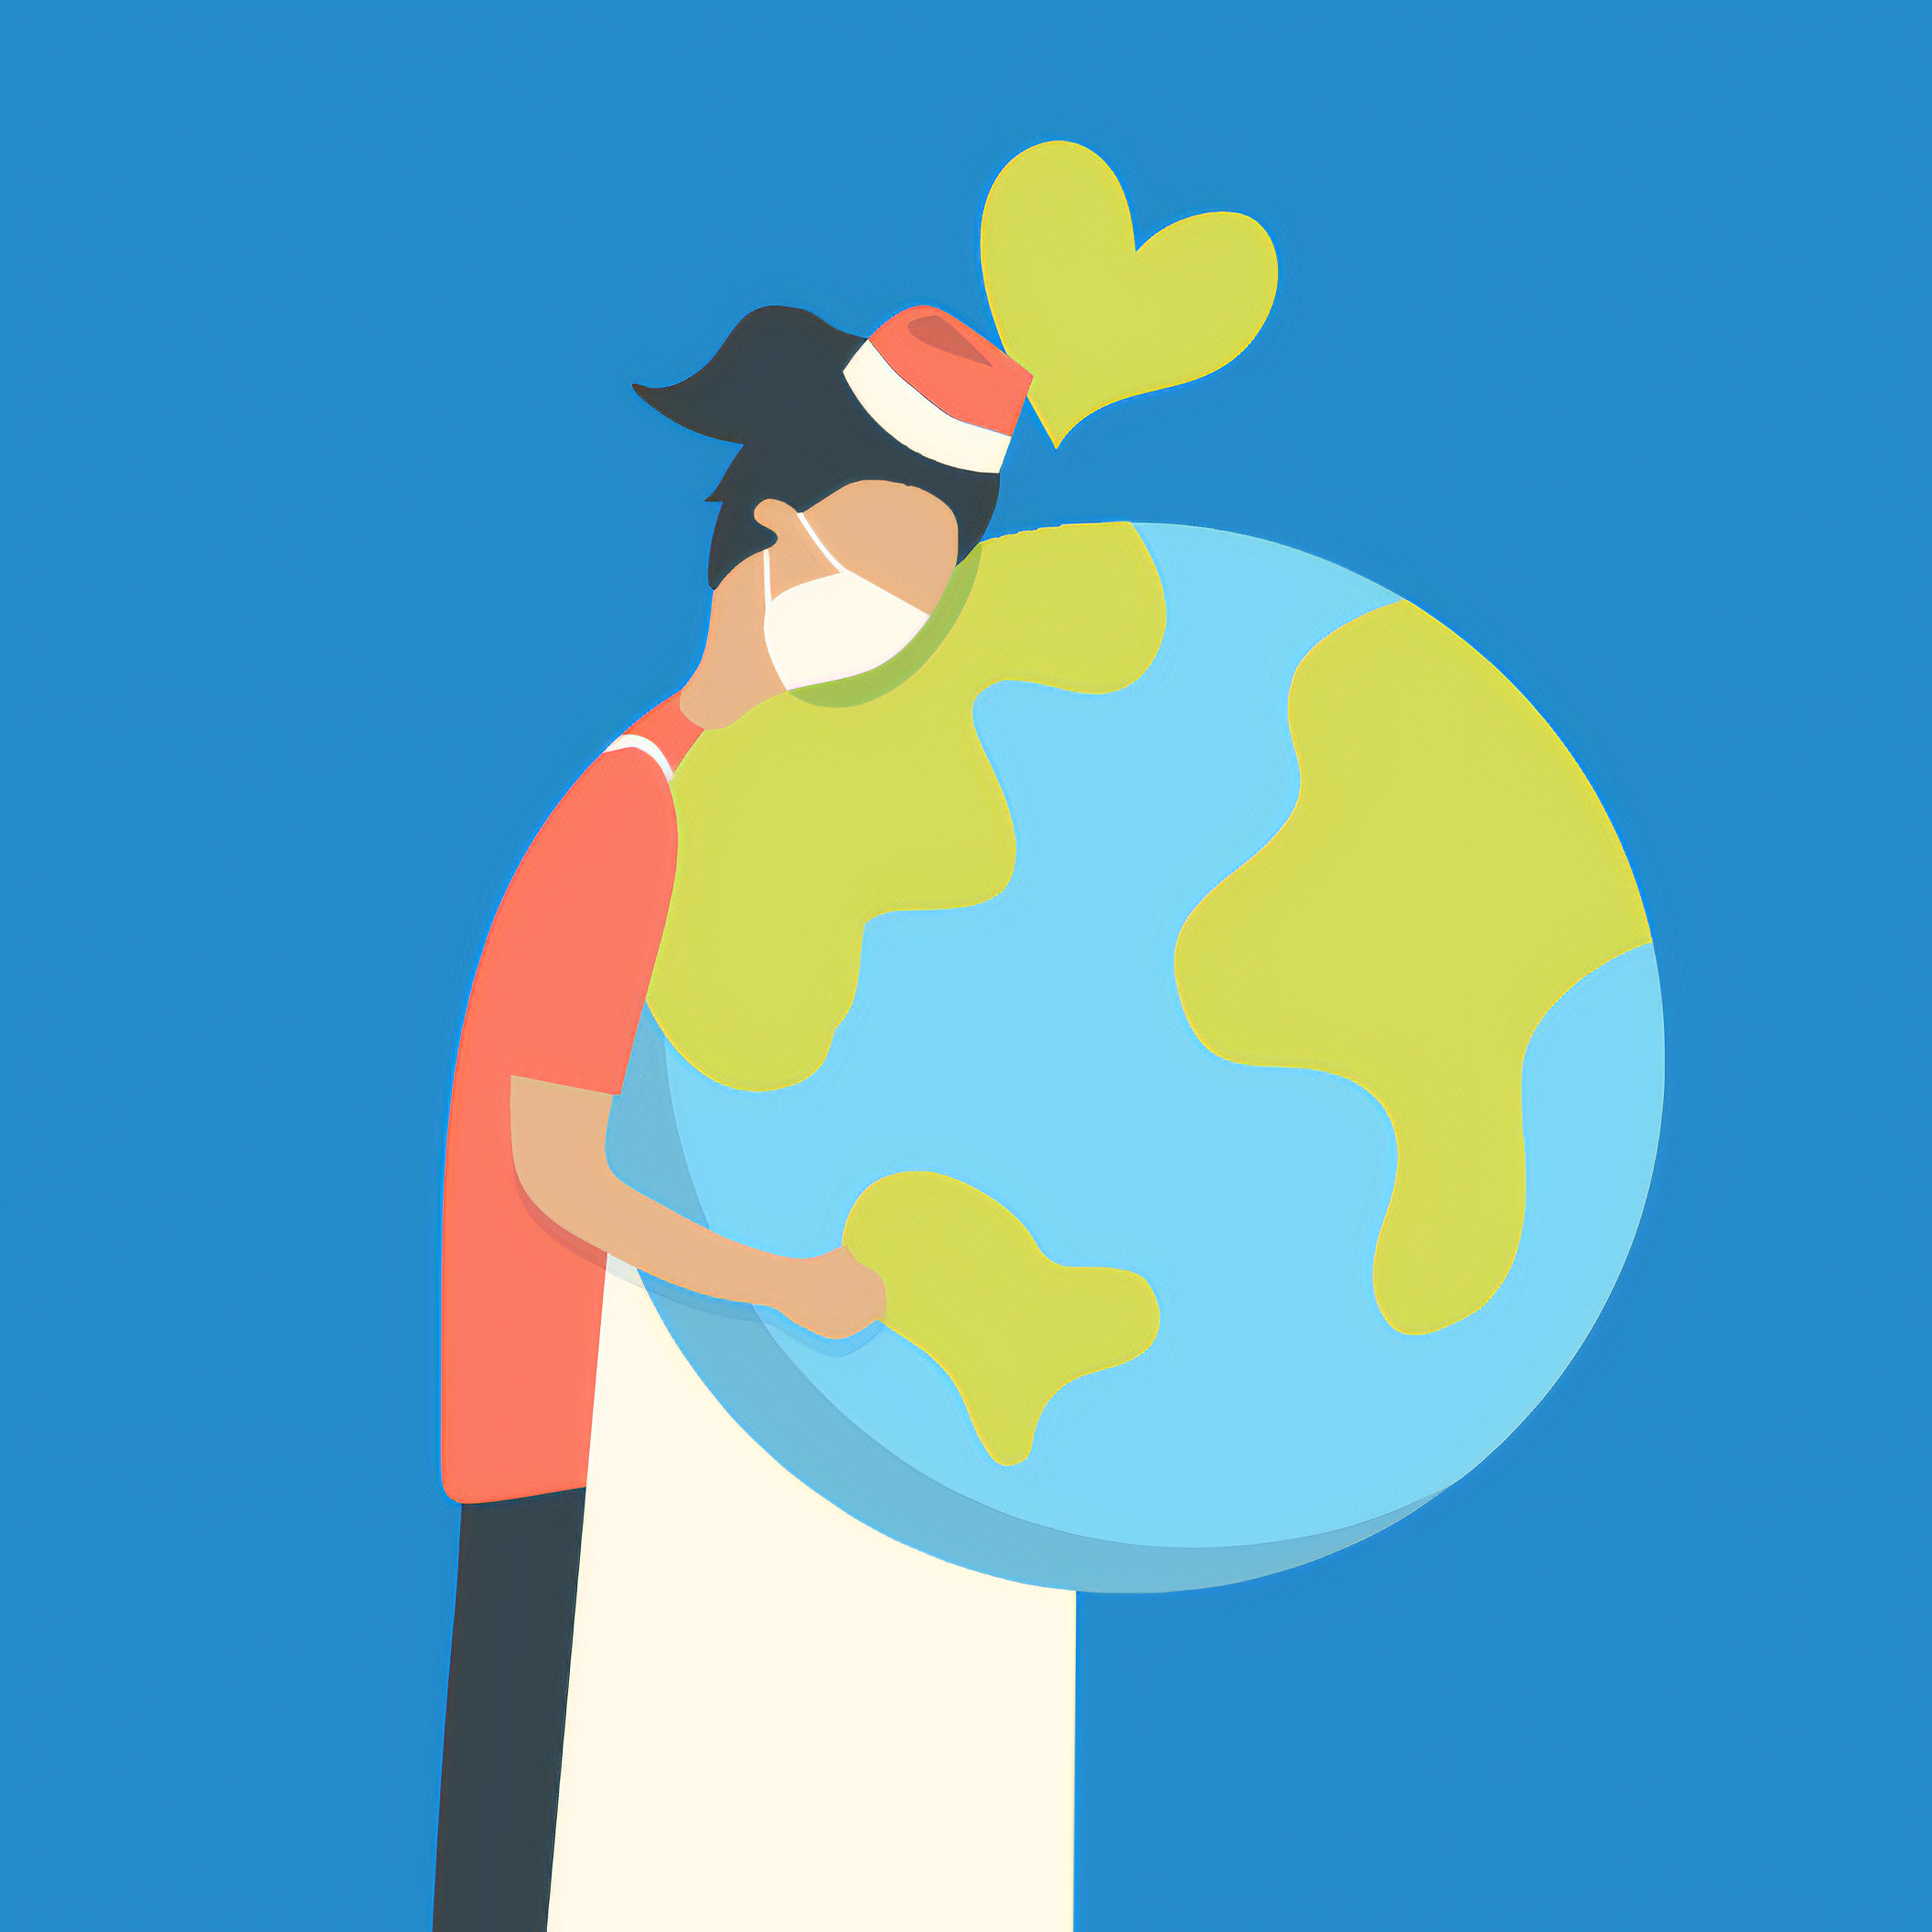 A picture of a cartoon worker hugging the Earth